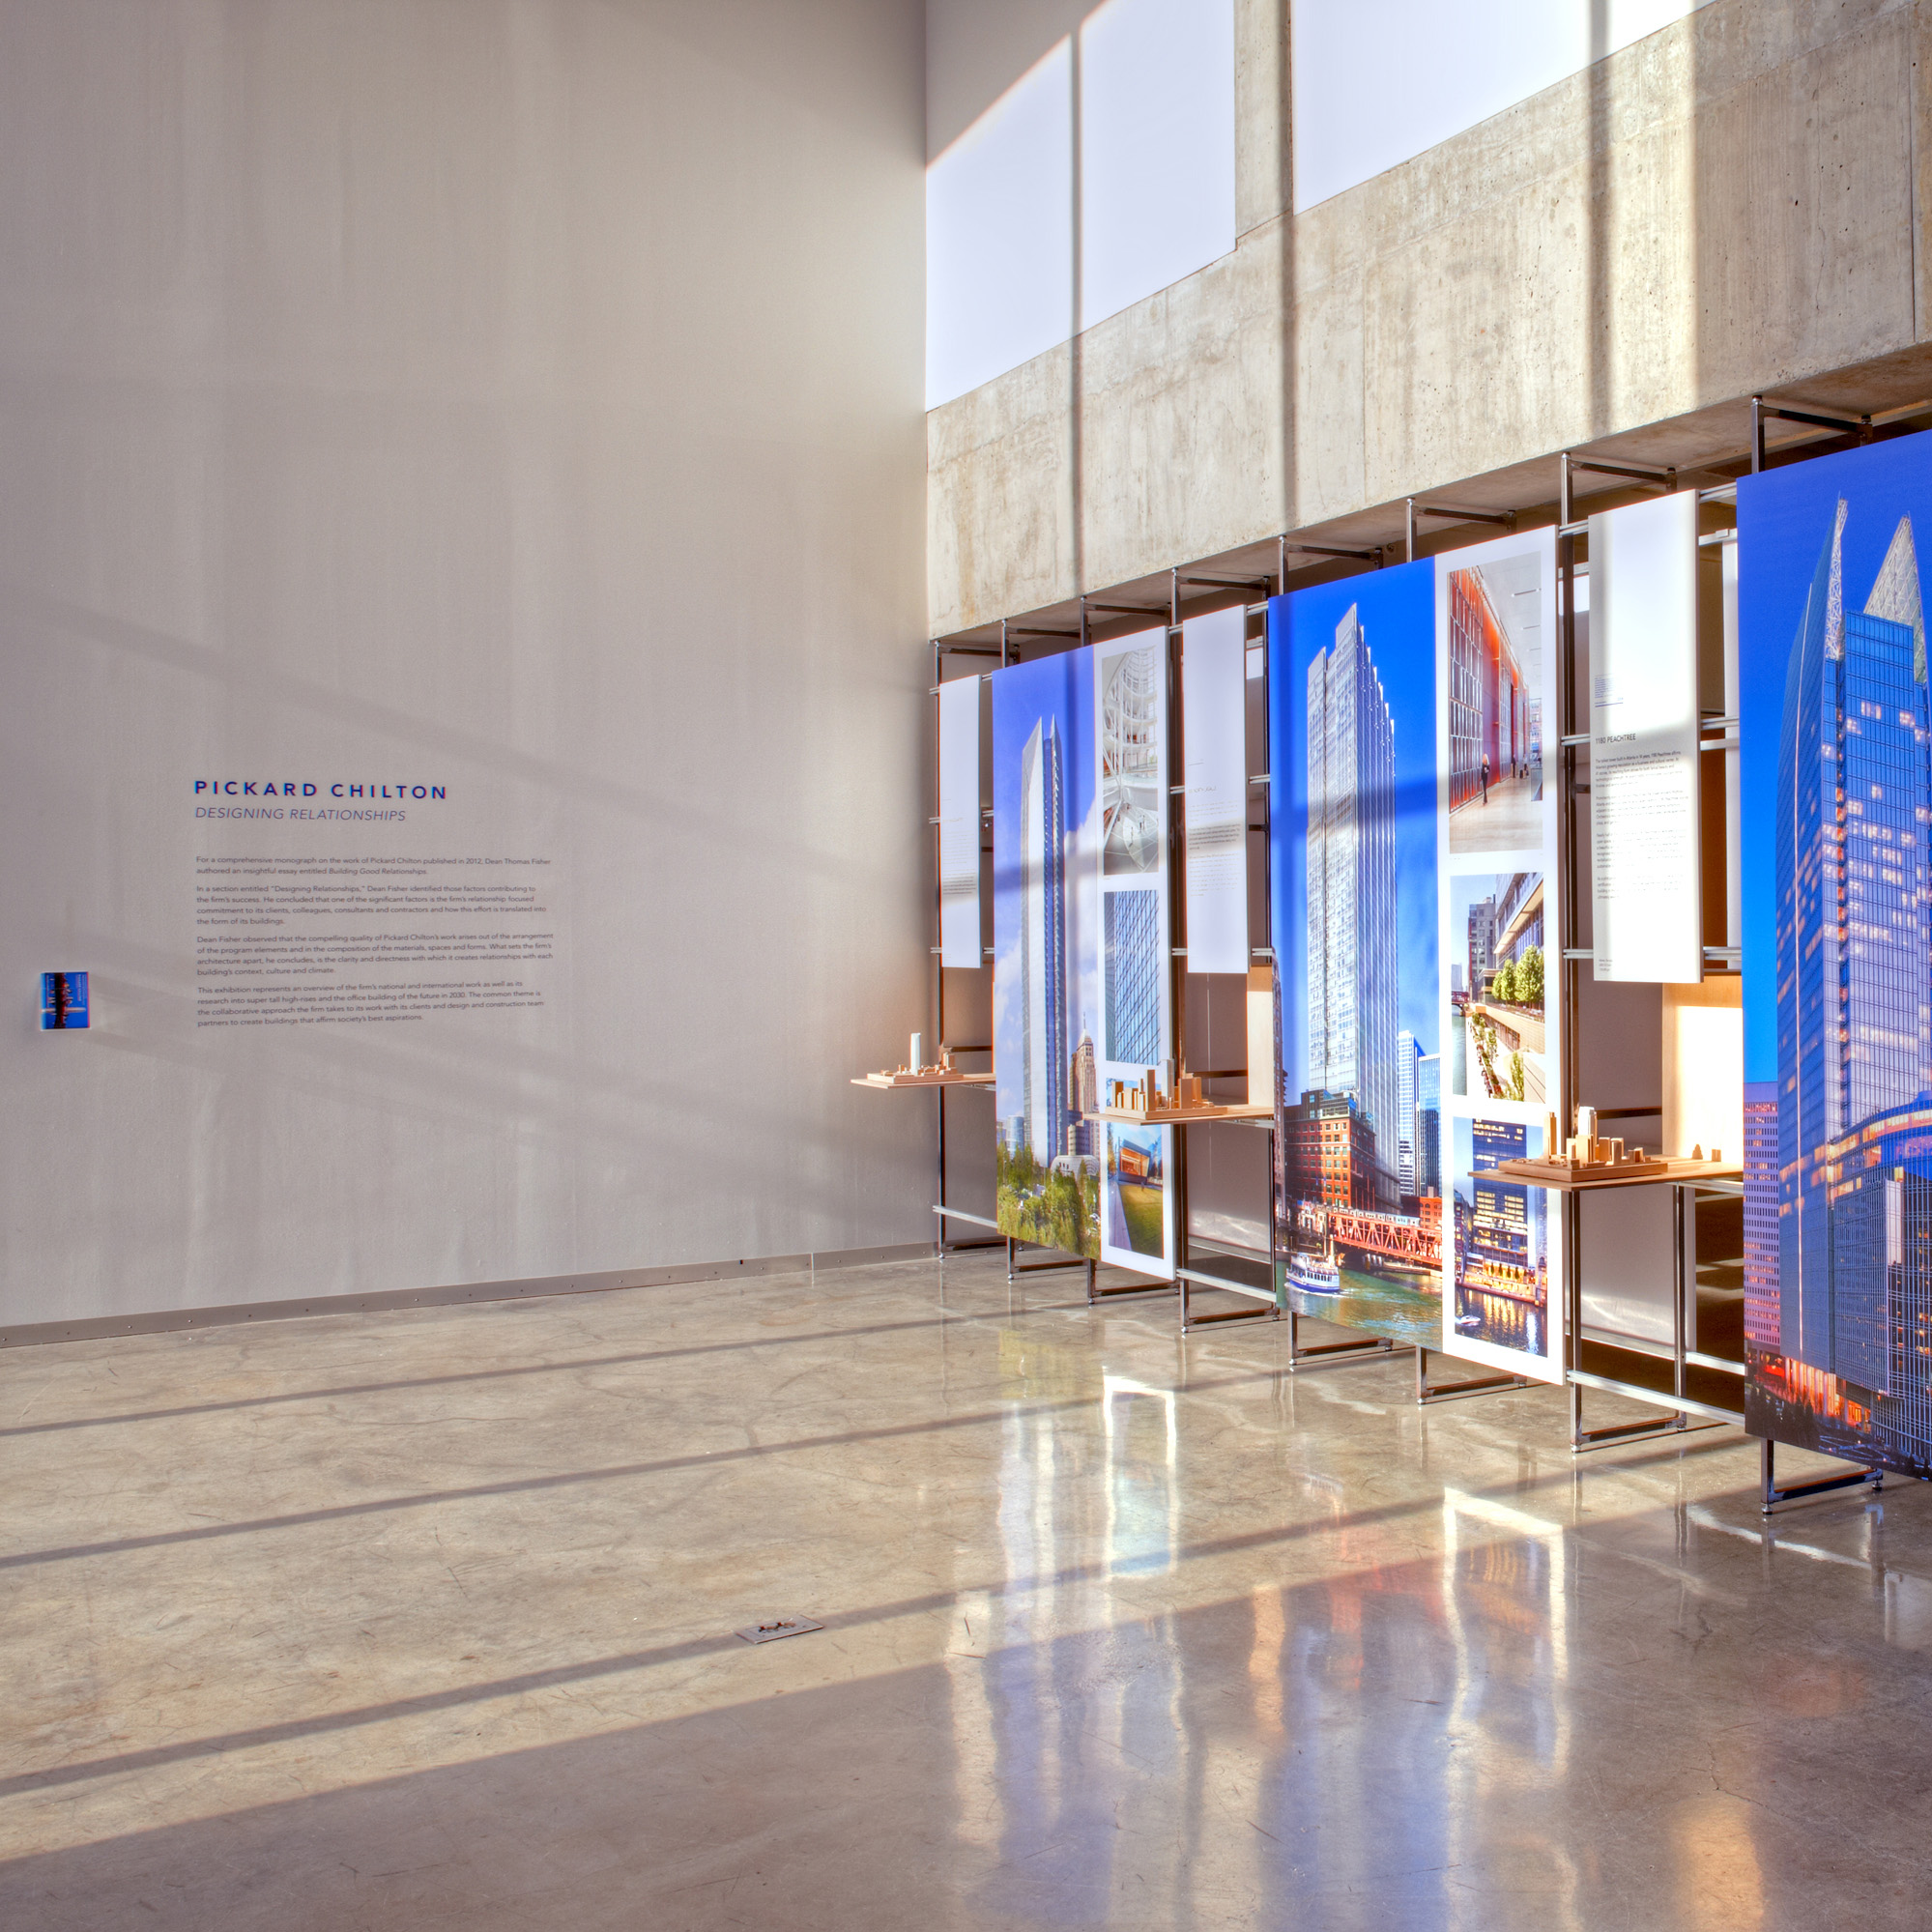 Pickard Chilton: Designing Relationships exhibition at Rapson Hall with photography boards